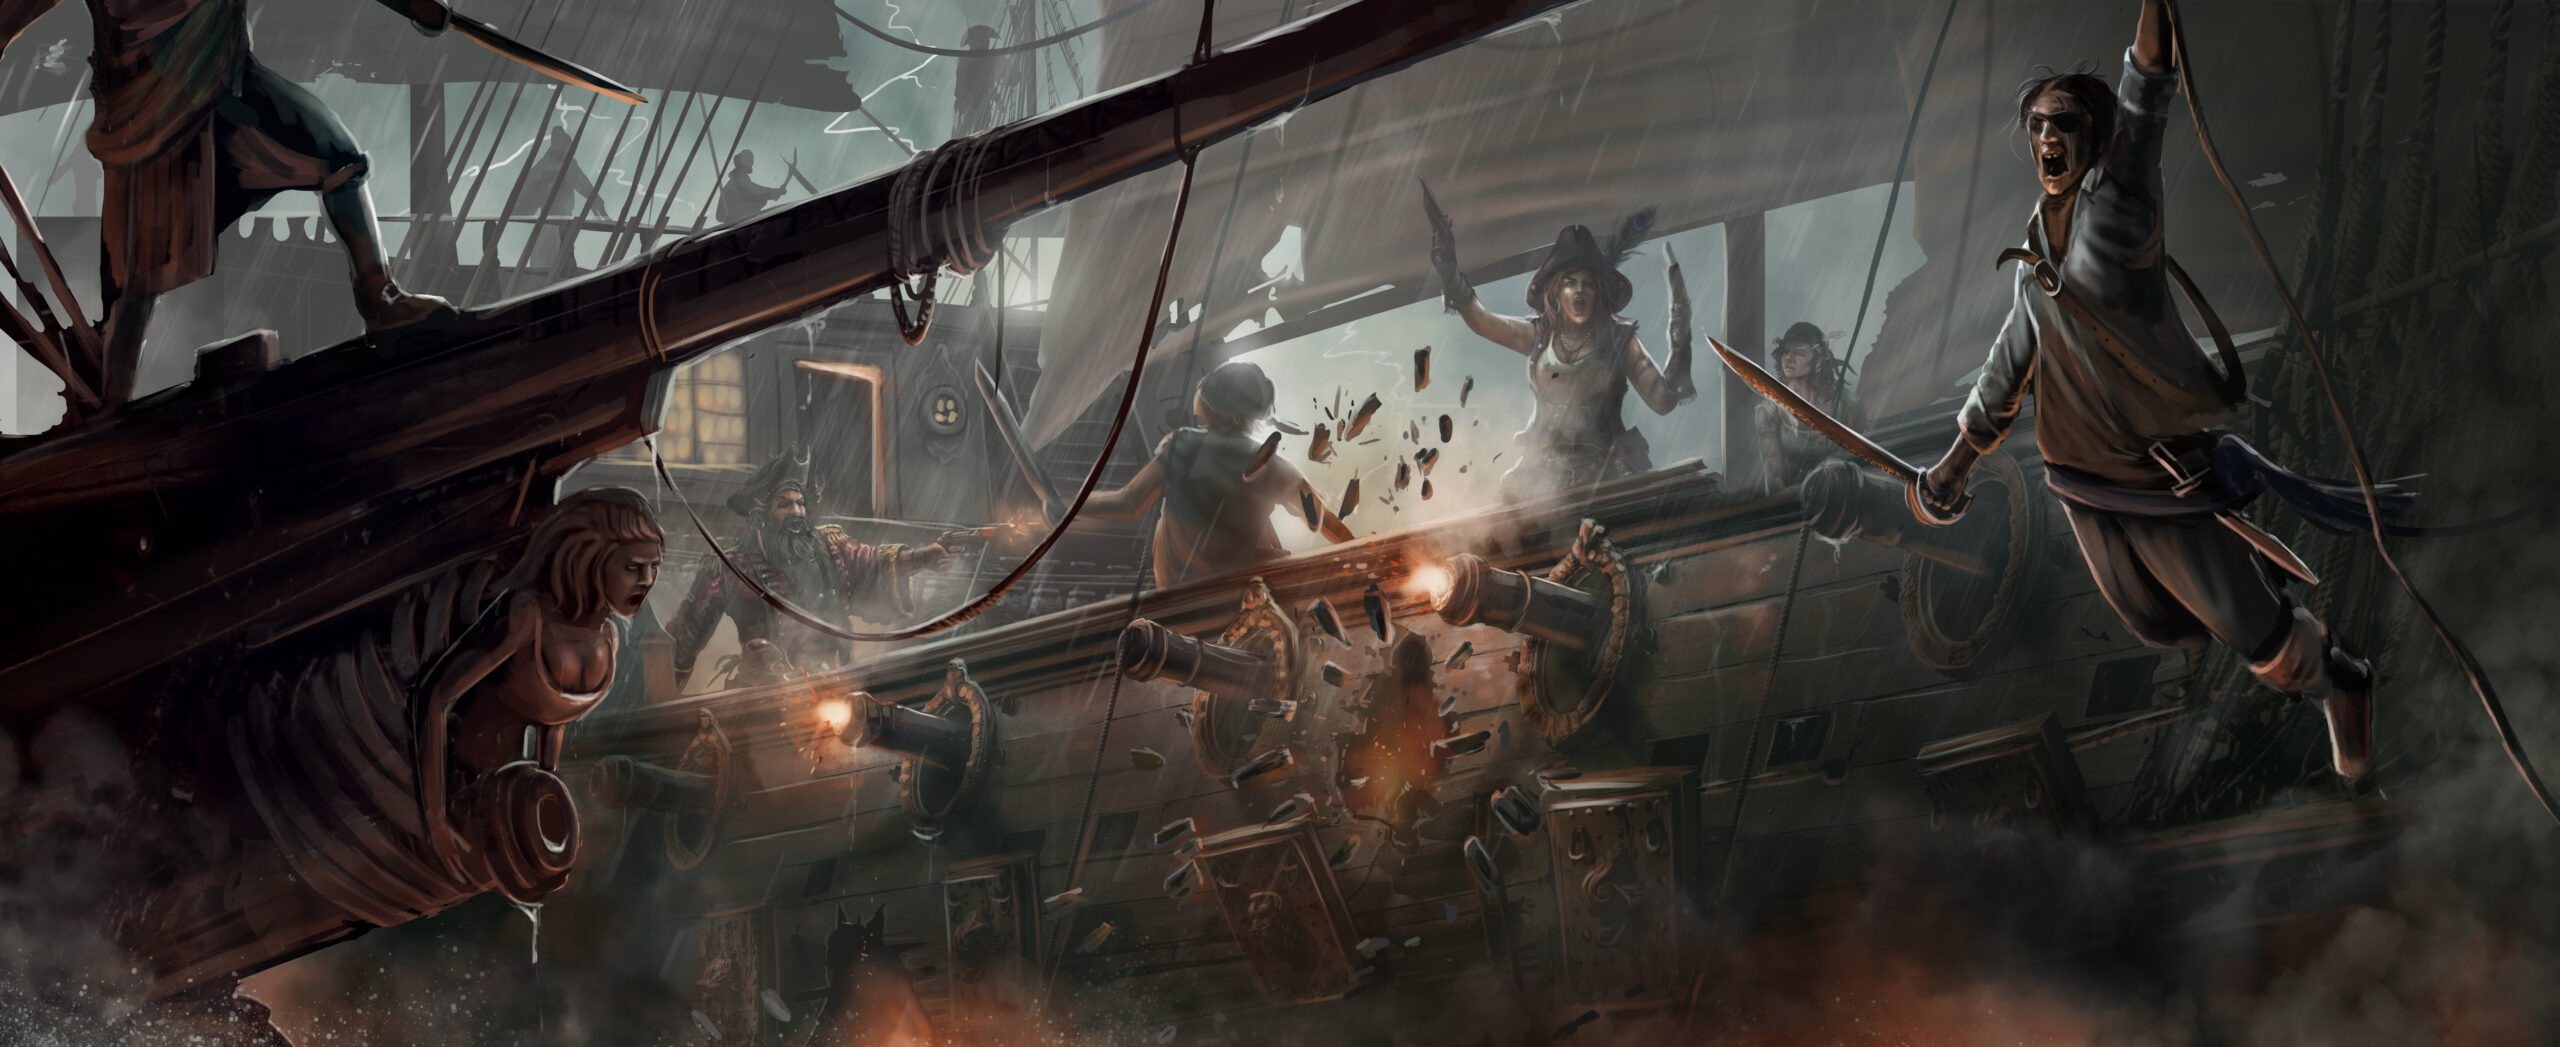 pirates broadsiding another ship. Pirate board game artwork by the noble artist